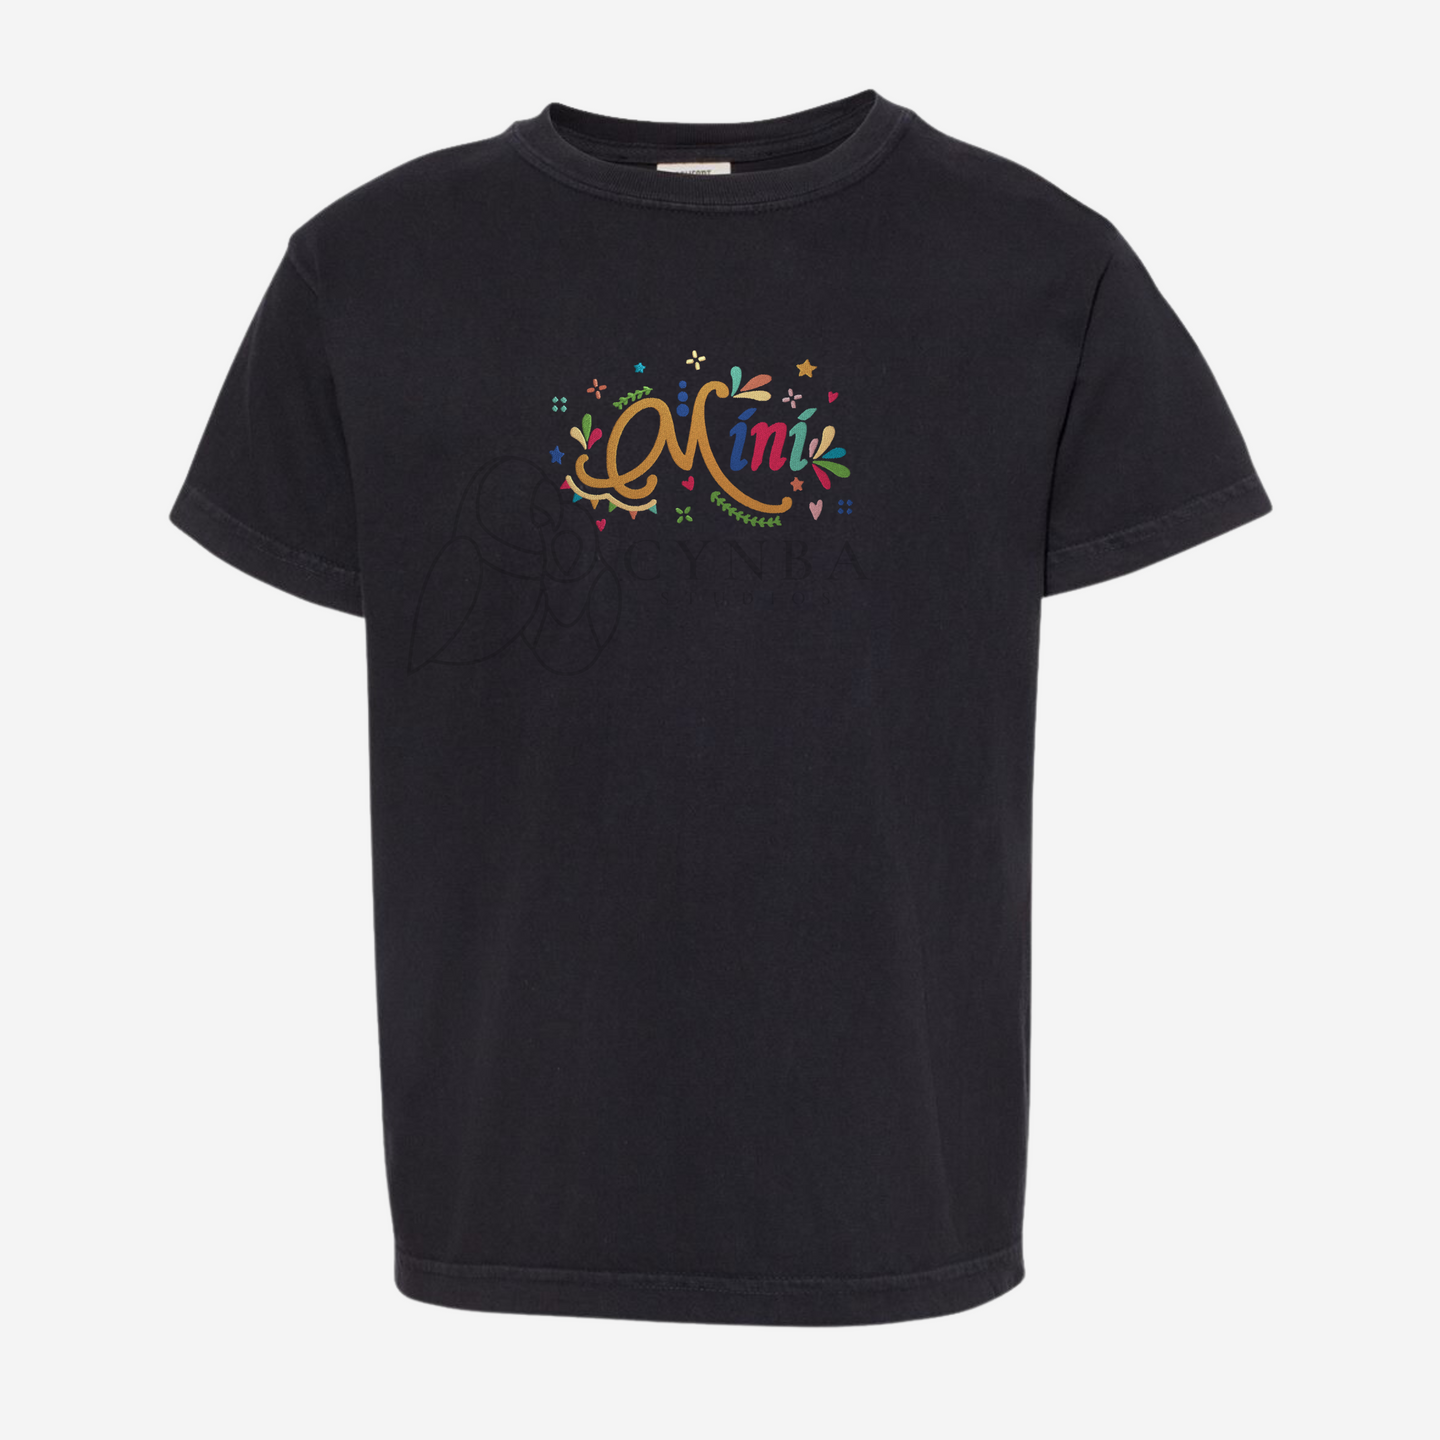 Mini Colorful Kids Embroidered T-shirt